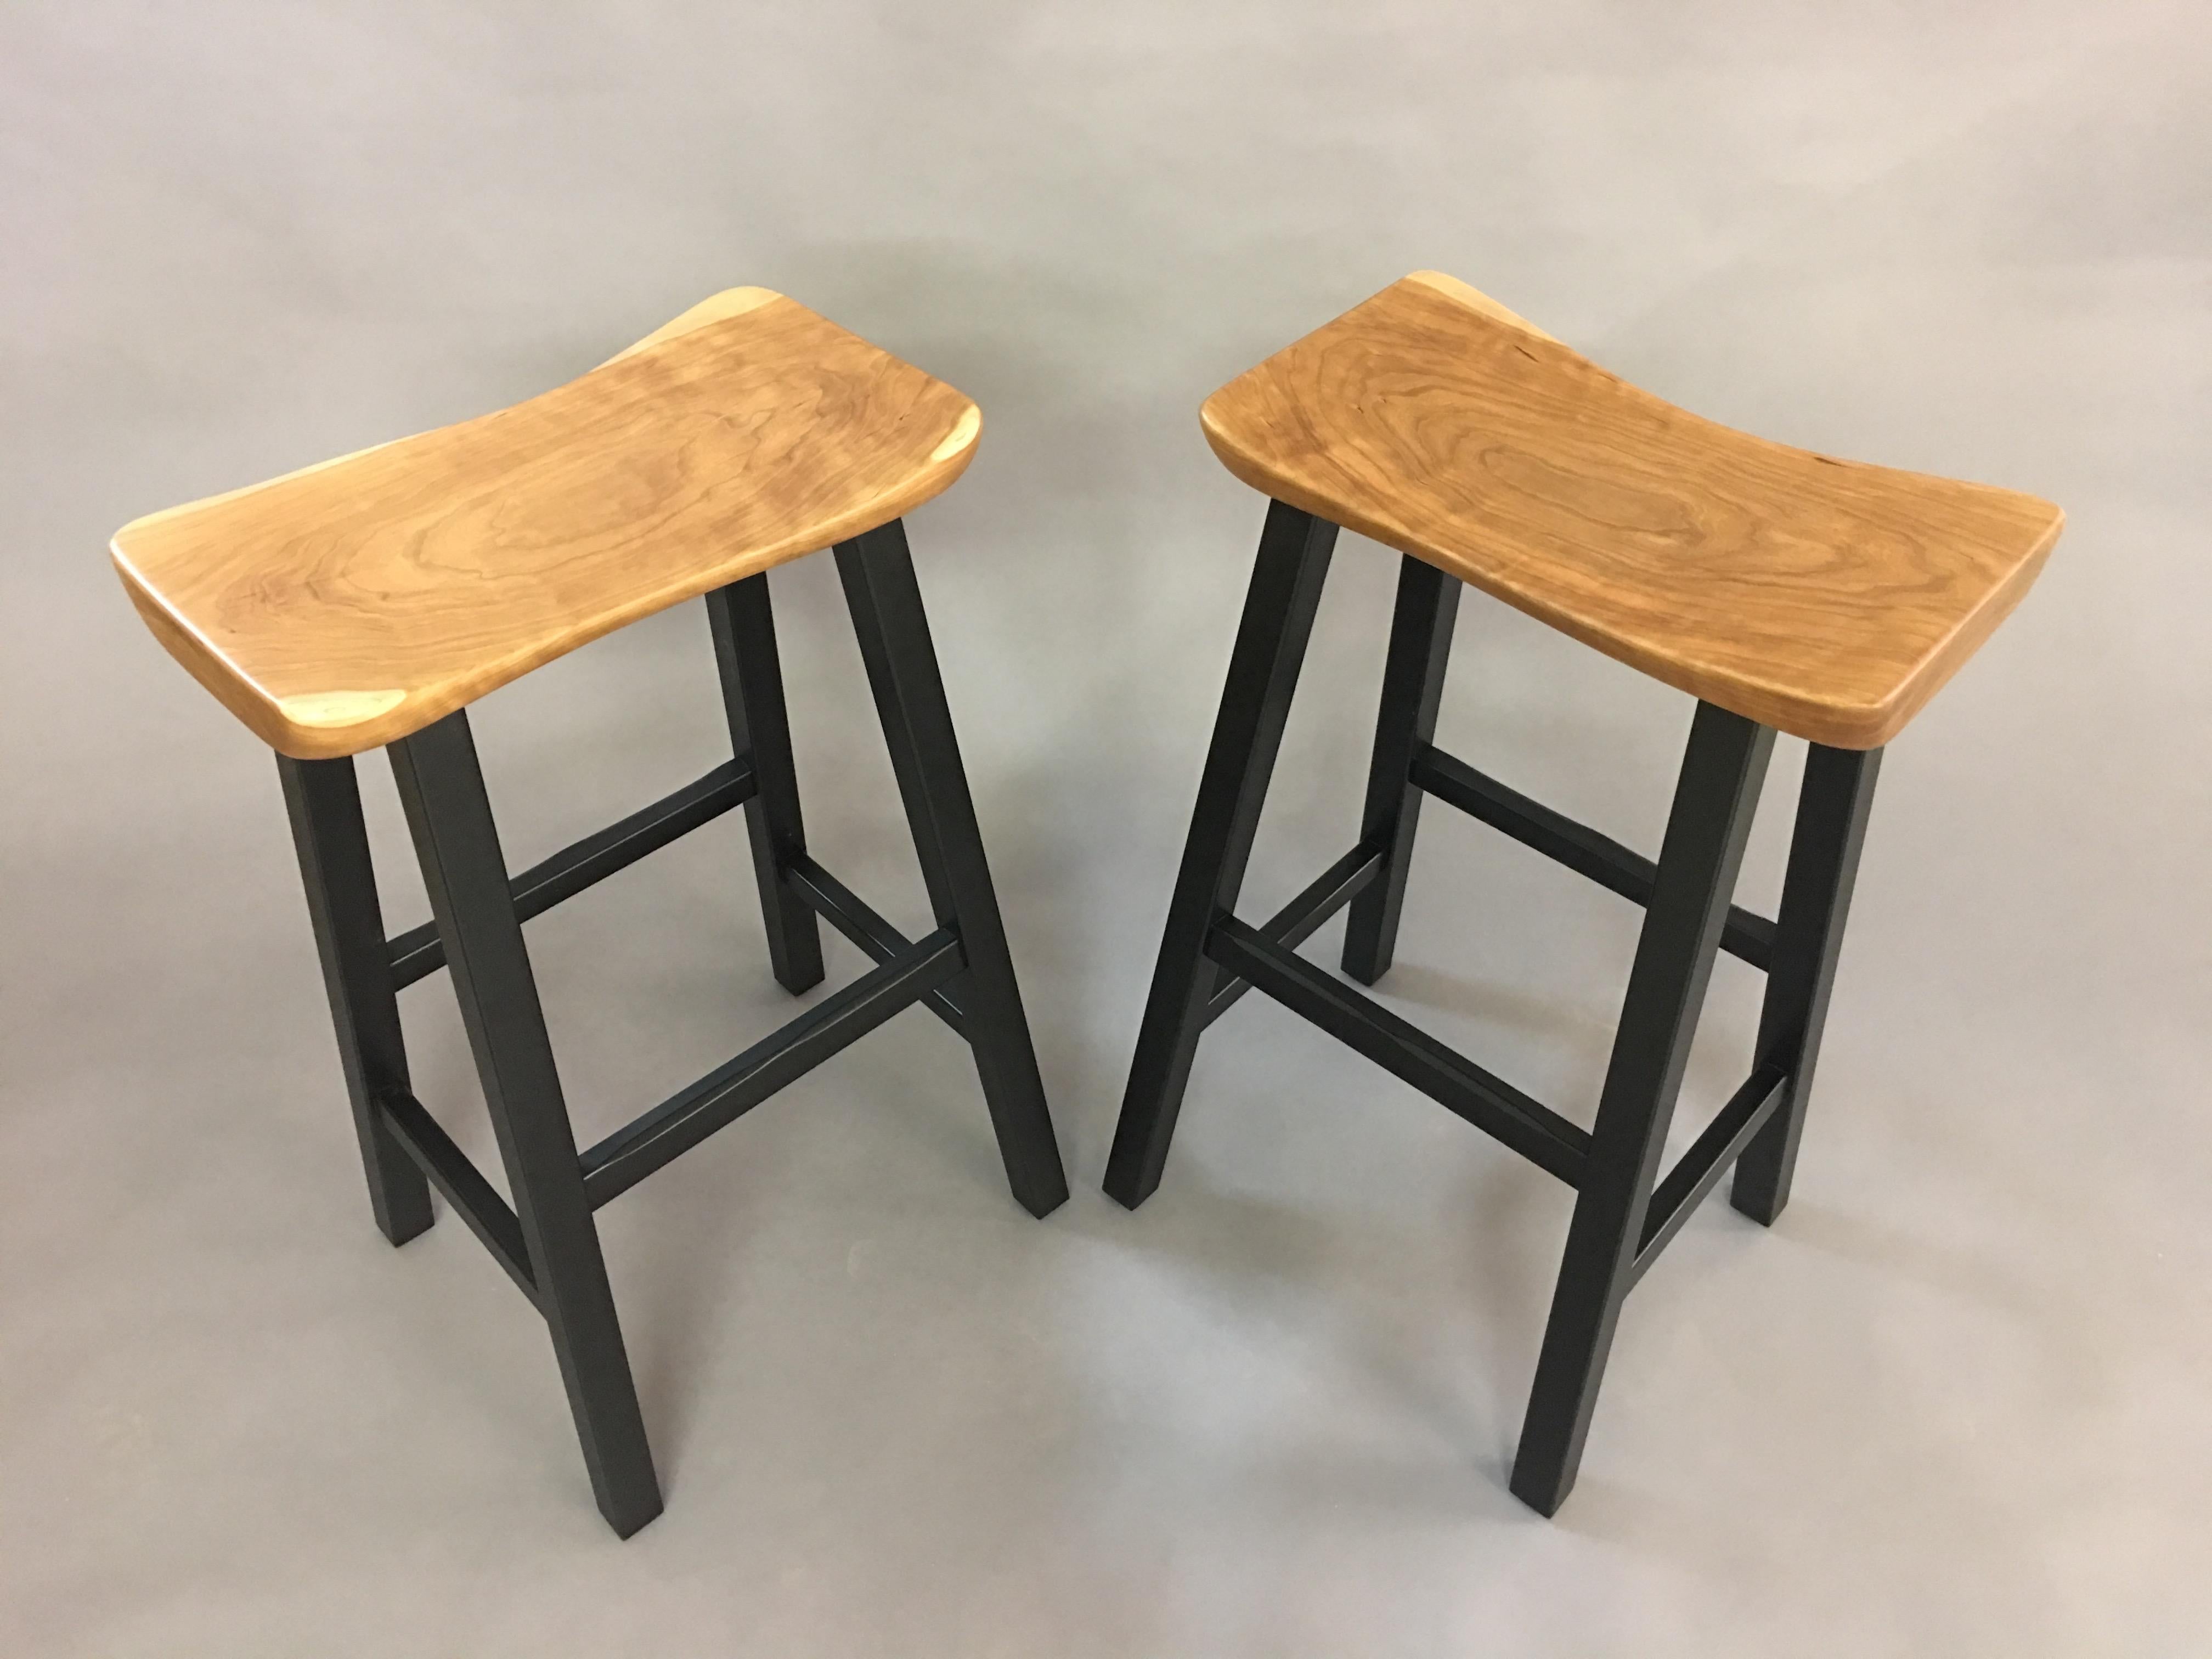 Hand-sculpted solid cherry seats with blackened hardwood bases. Bases are assembled with mortise and tenon joinery. Can be modified for bar or counter height. Custom woods are also available.